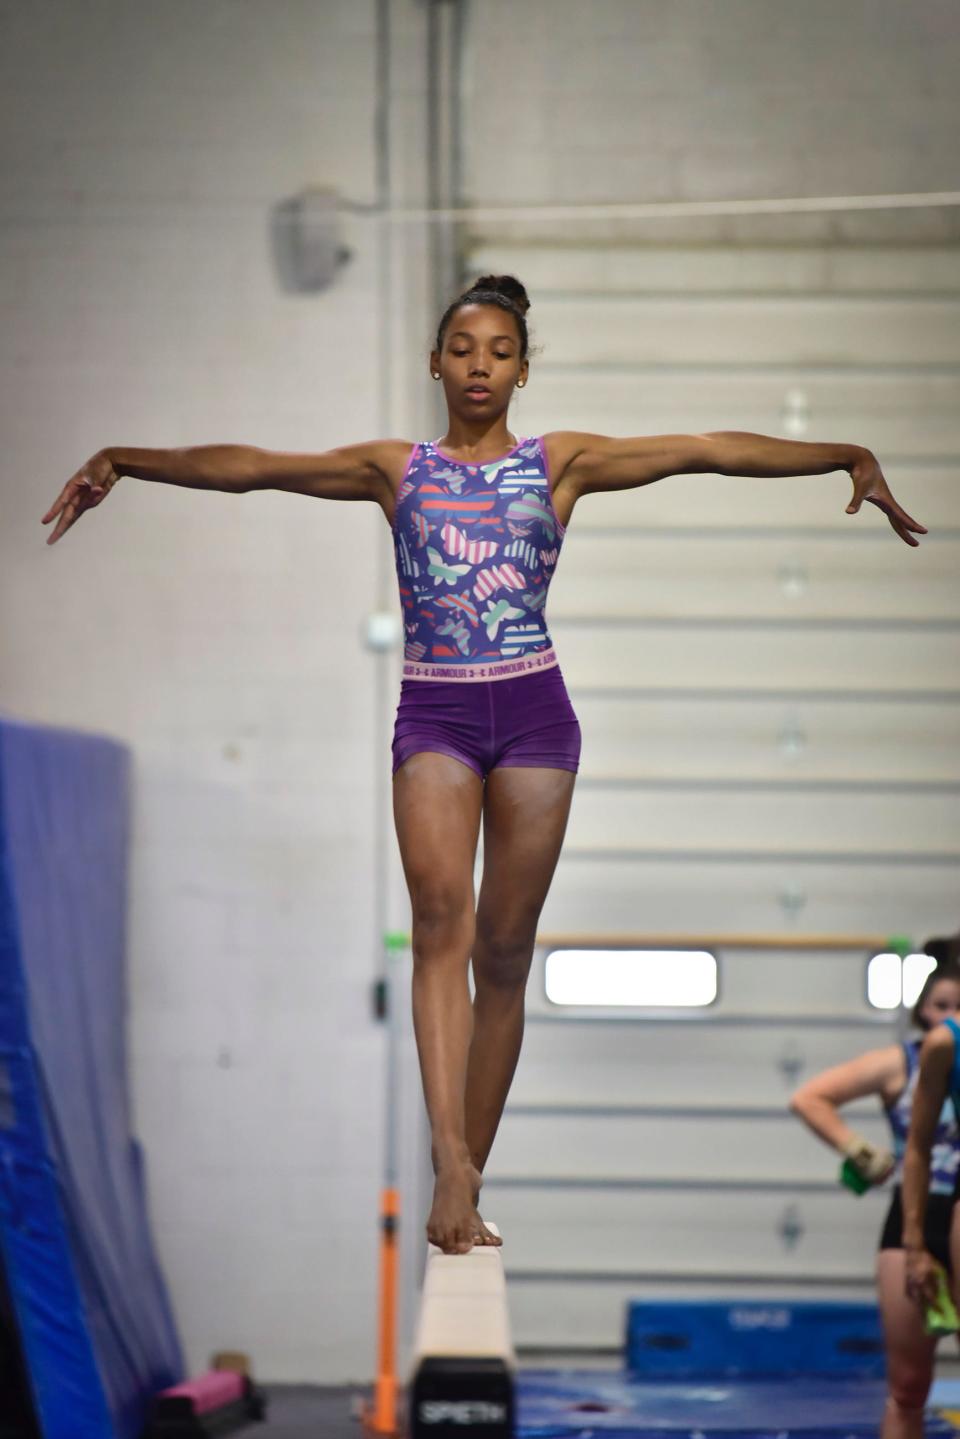 Olivia Kelly, a Mahwah resident who is an Olympic hopeful for Team Barbados, practices on the balance beam at North Stars Gymnastics Academy in Boonton Tuesday on 07/25/22.